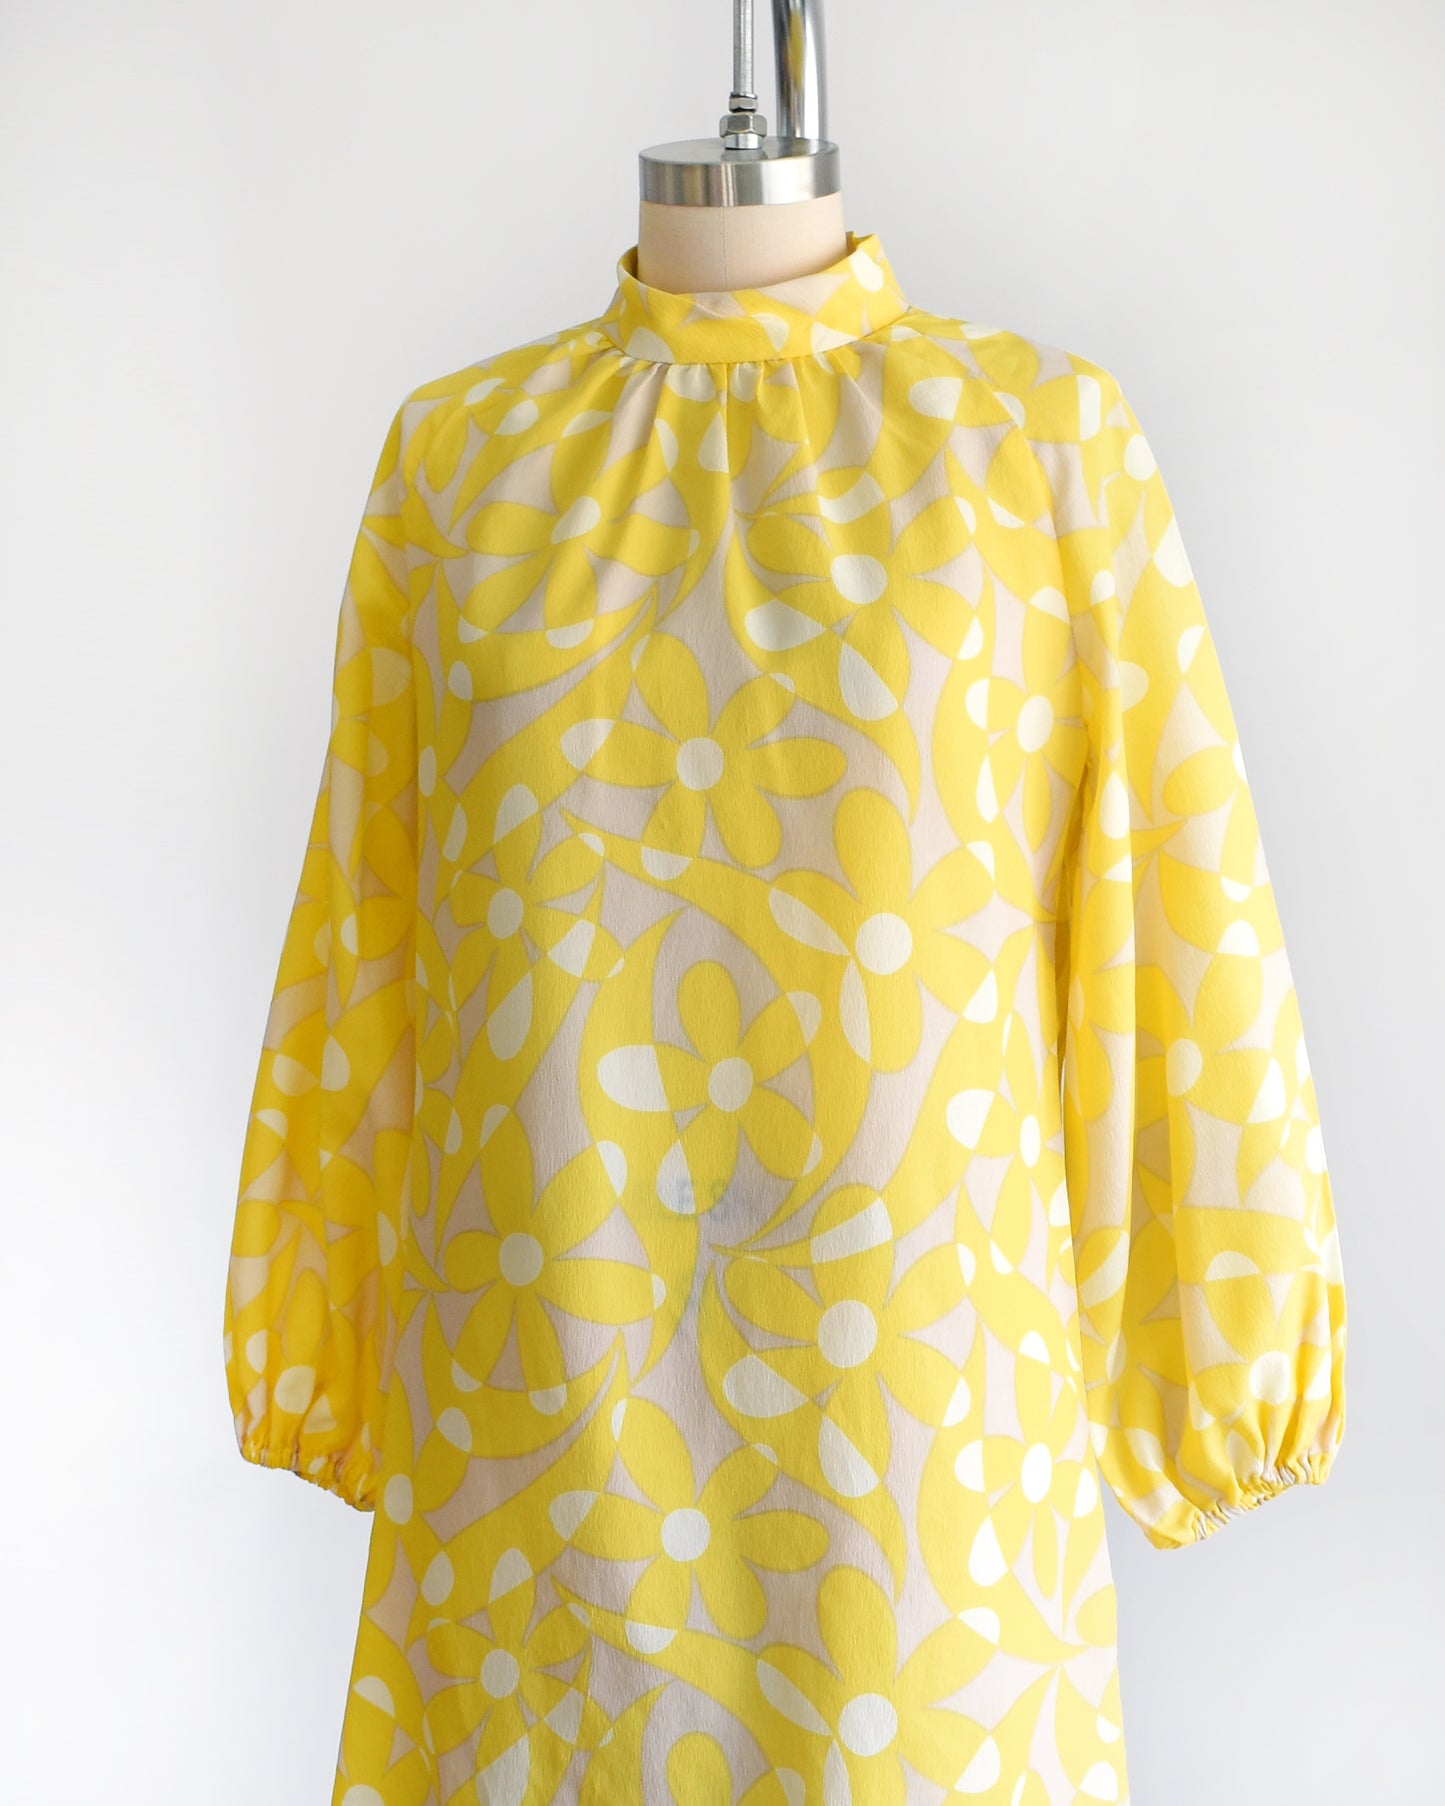 Side front view of a vintage 1960s mod mini dress features a bright yellow and white floral pattern with swirls, set on a pale beige background. 